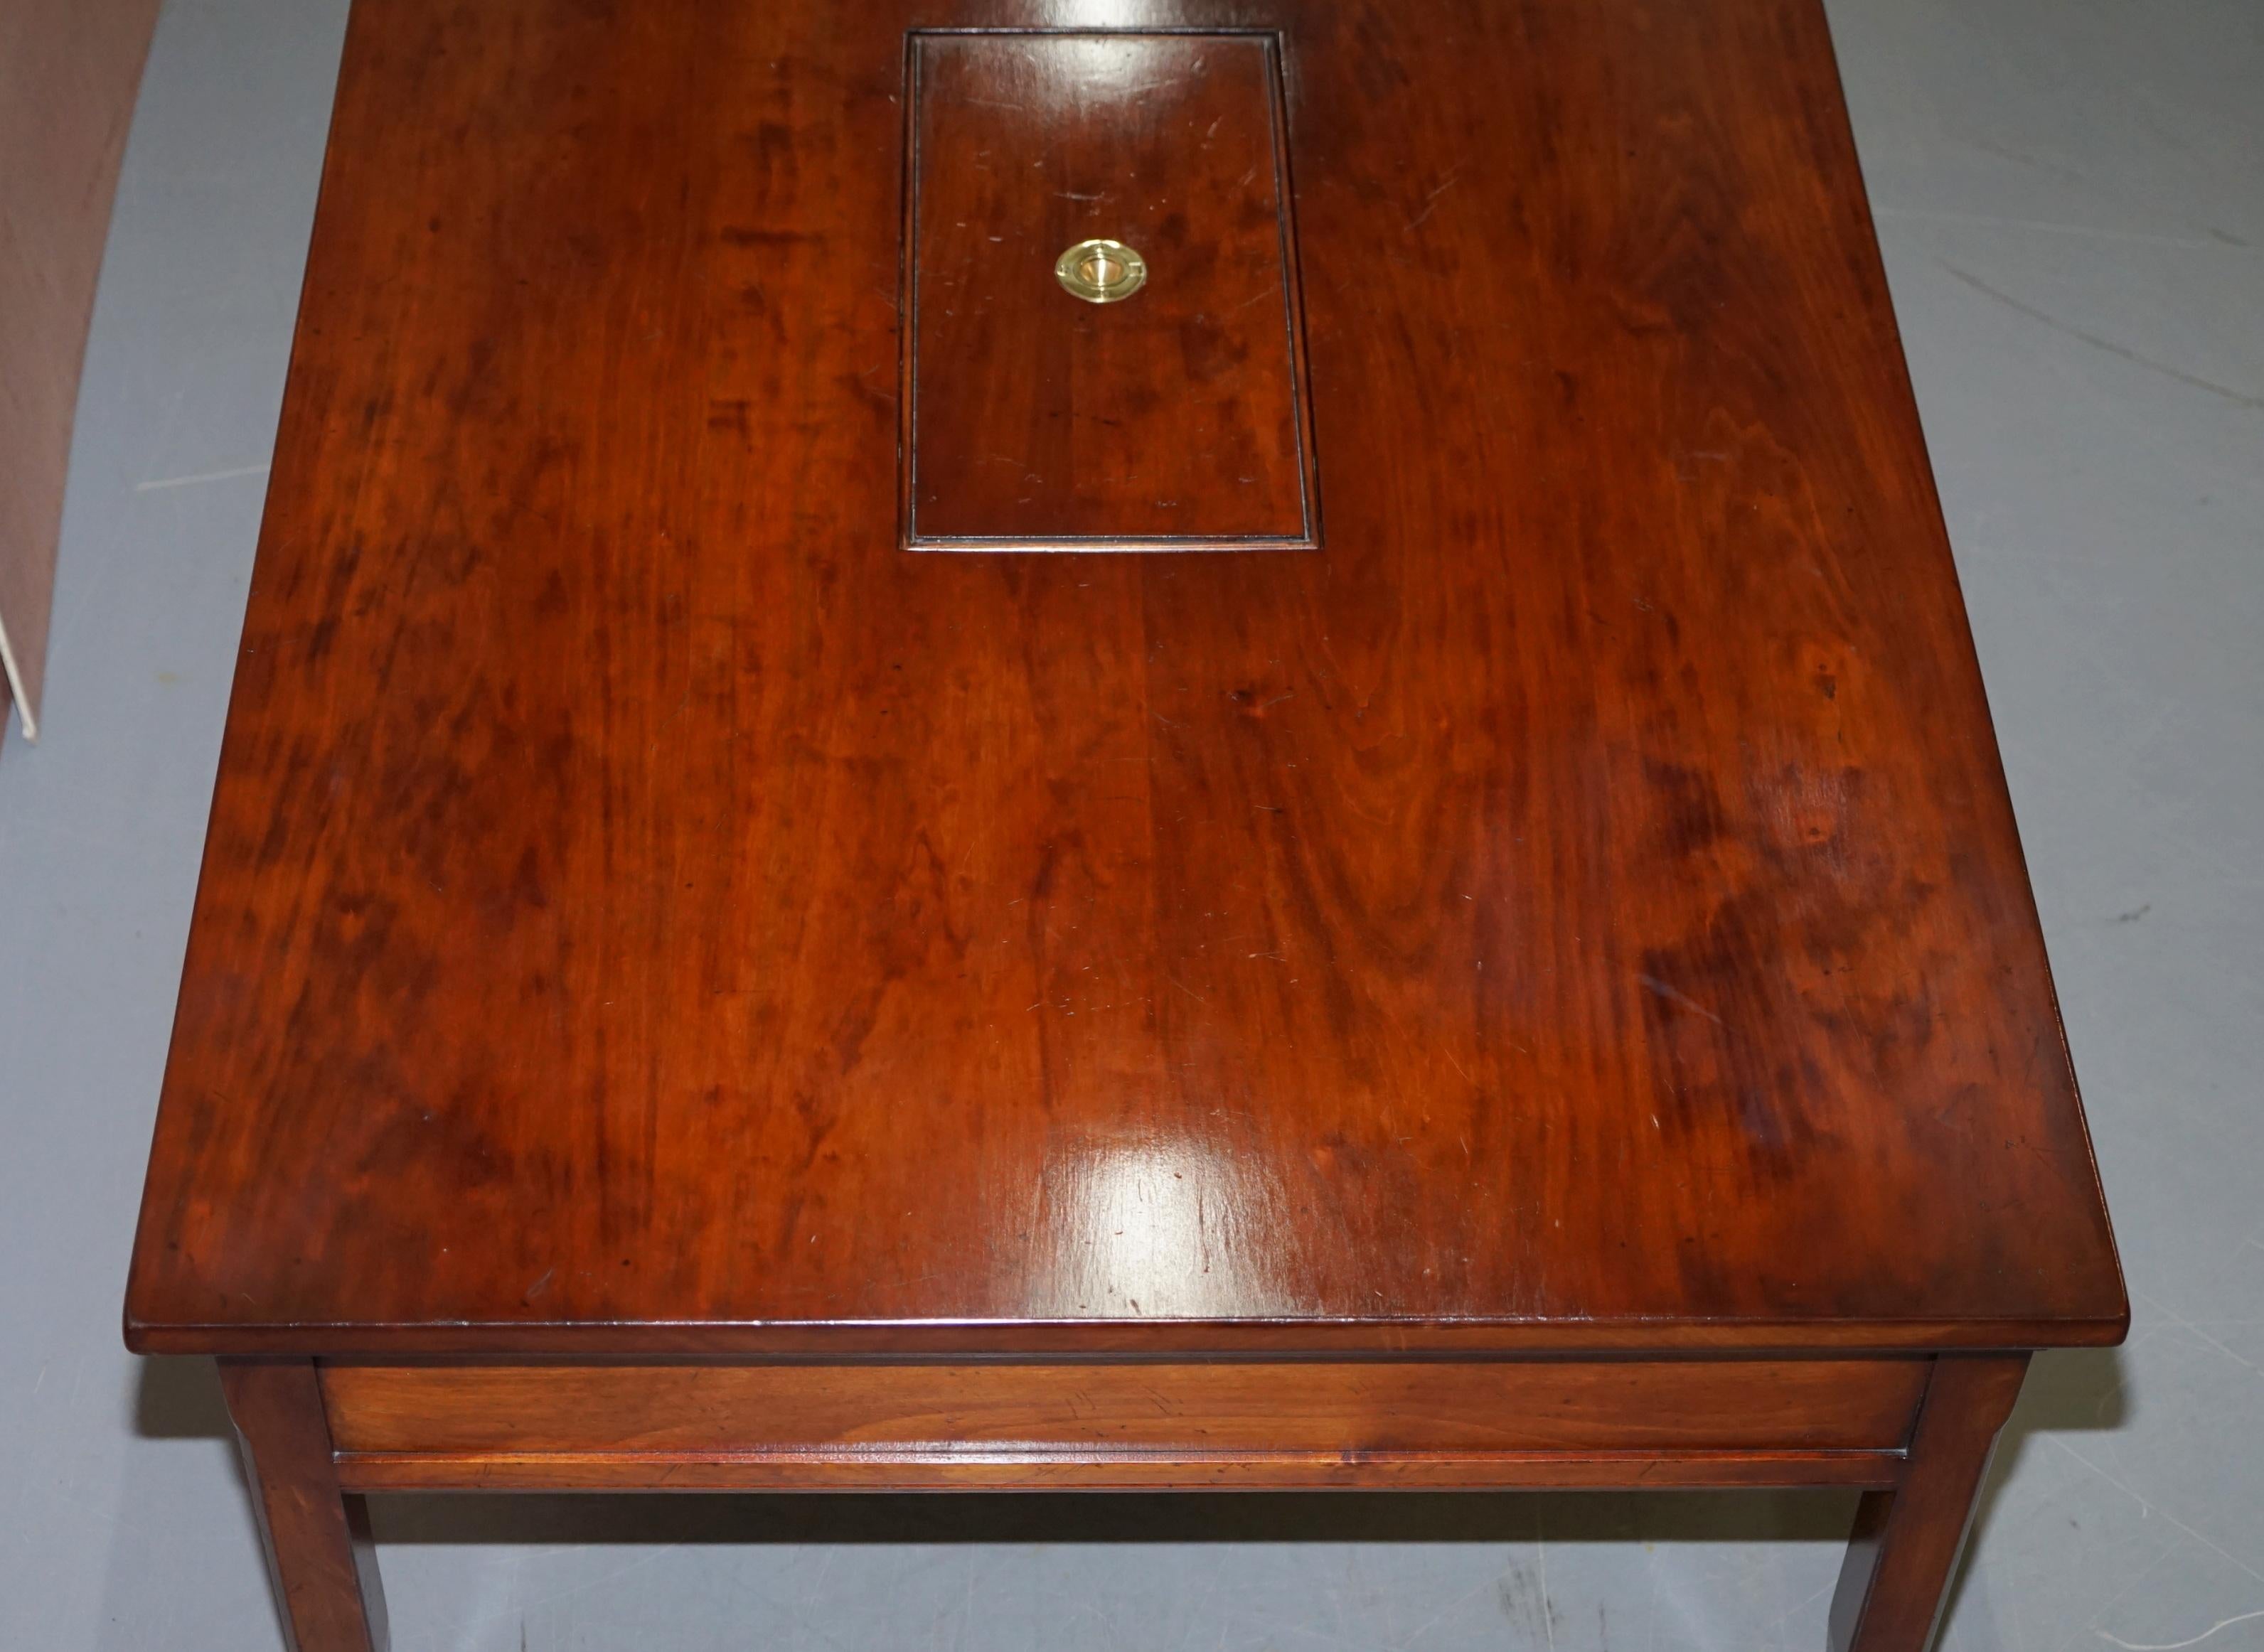 Hand-Crafted Solid Hardwood Harrods Kennedy Military Campaign Coffee Table Internal Storage